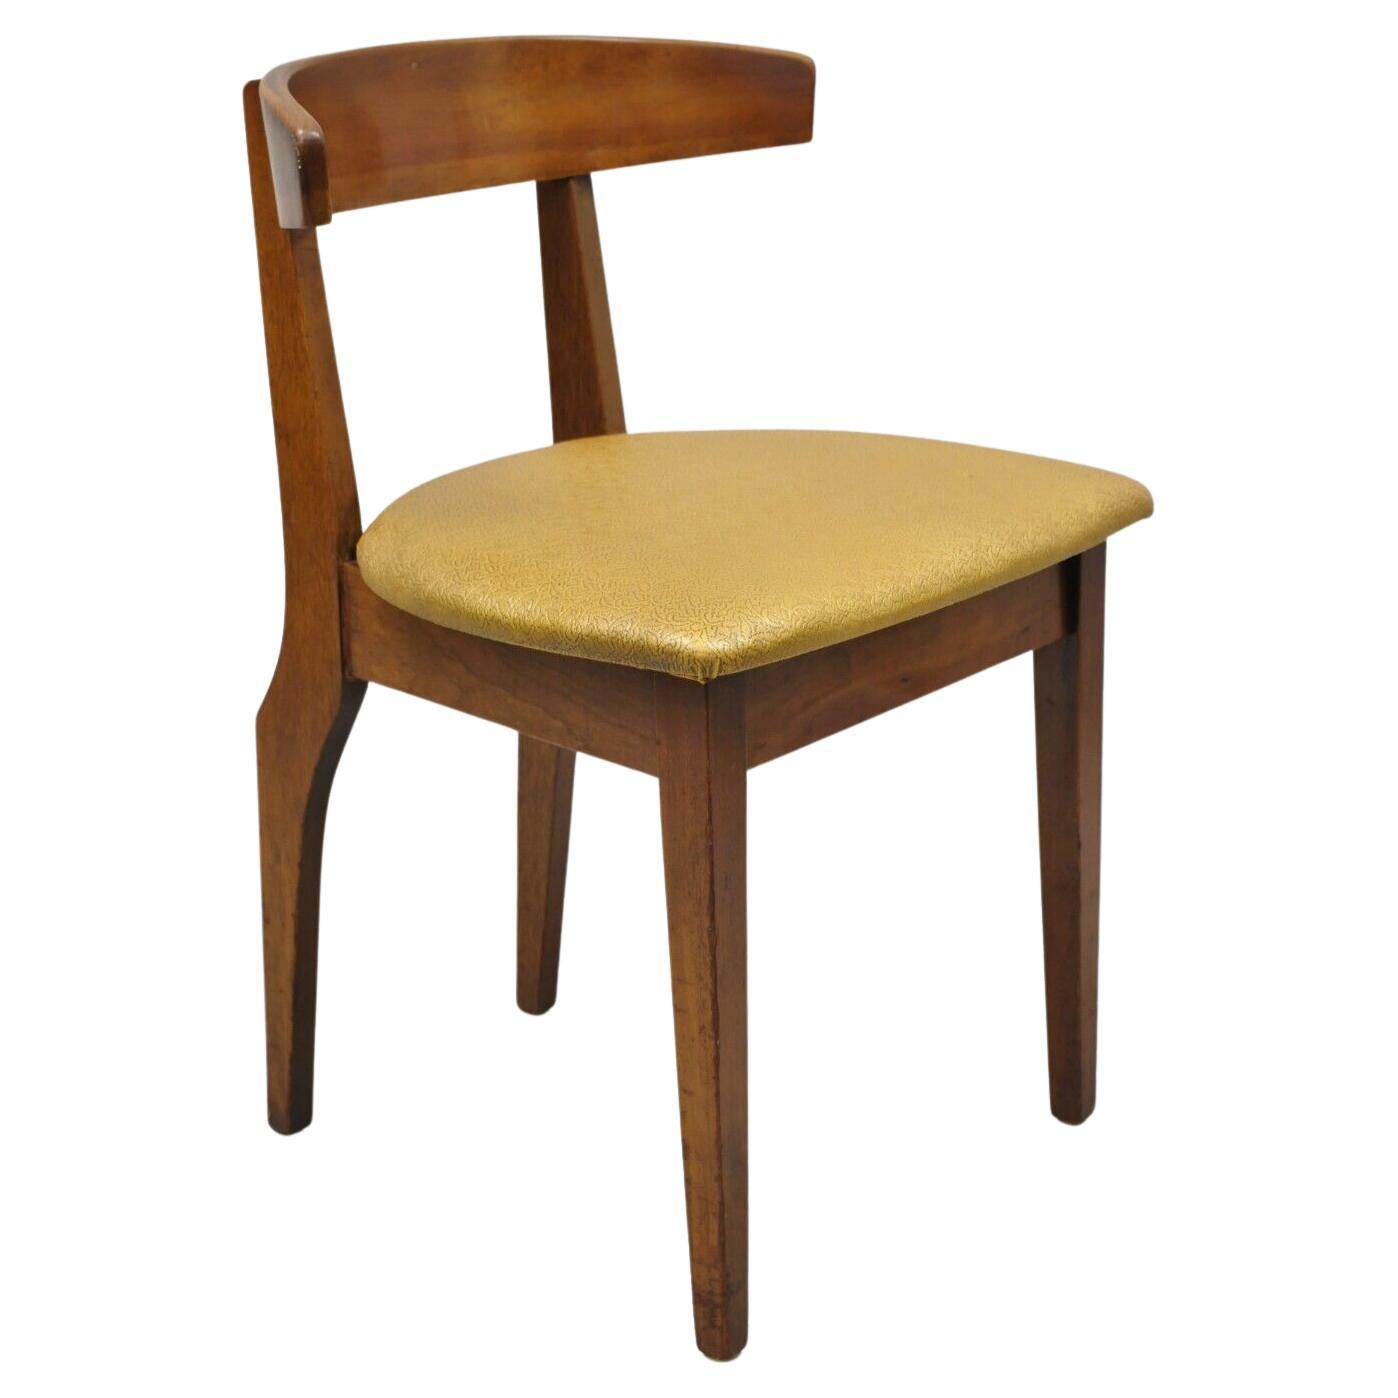 Mid-Century Modern Cherry Wood Curved Back Hoof Leg Dining Side Chair